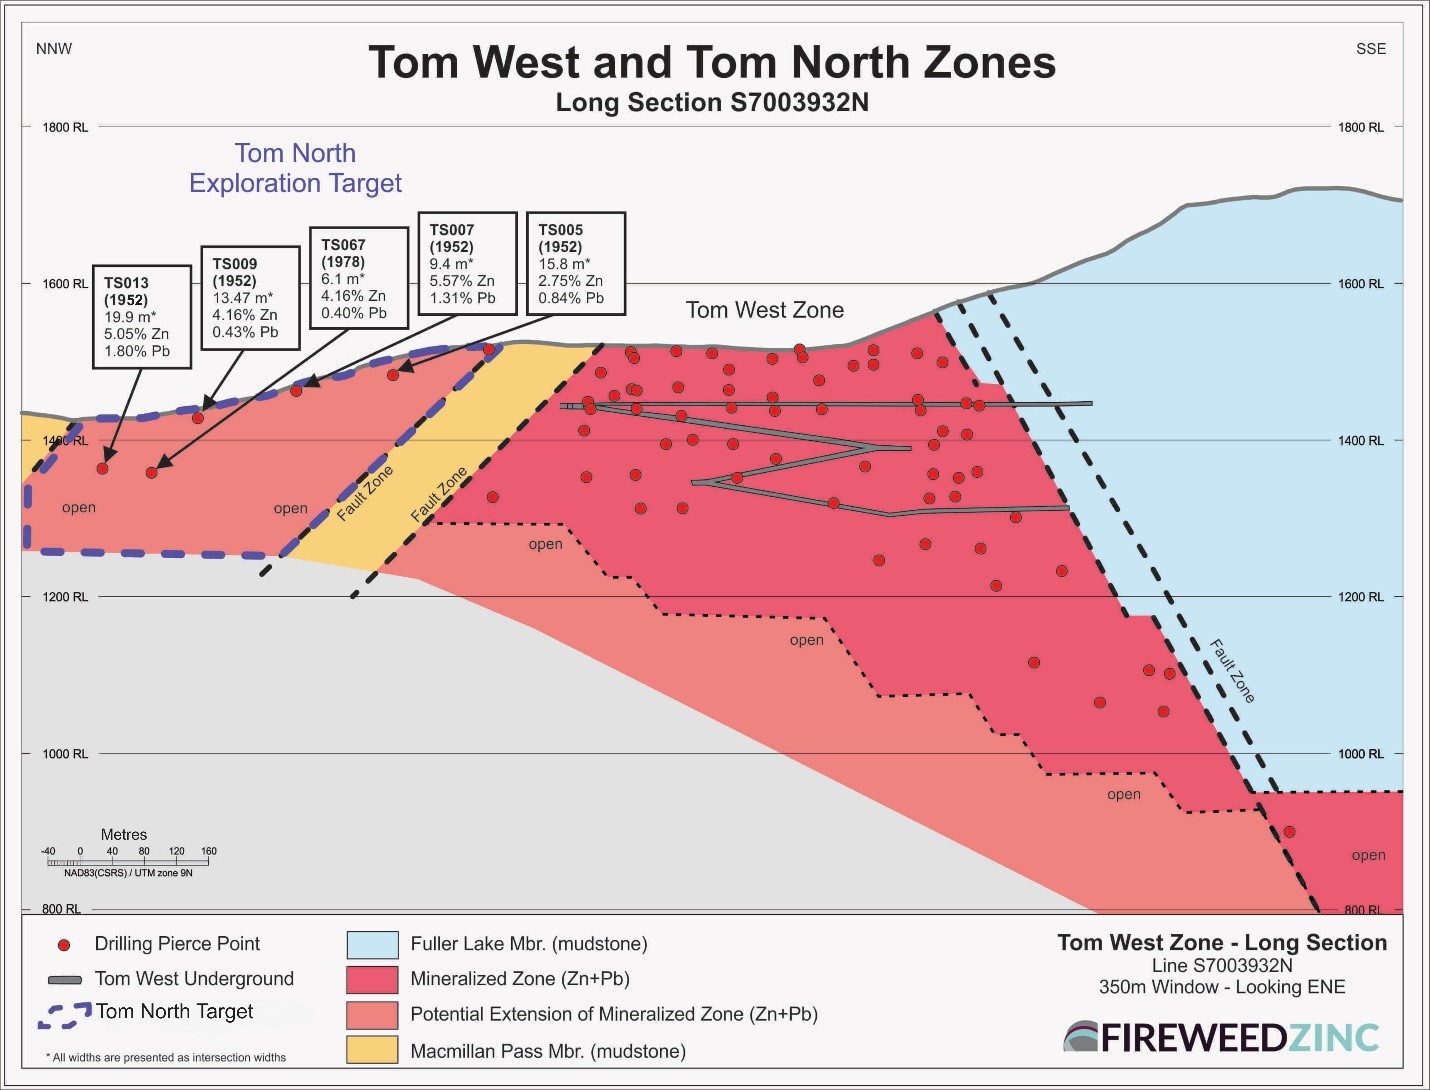 Tom West Zone - Long Section